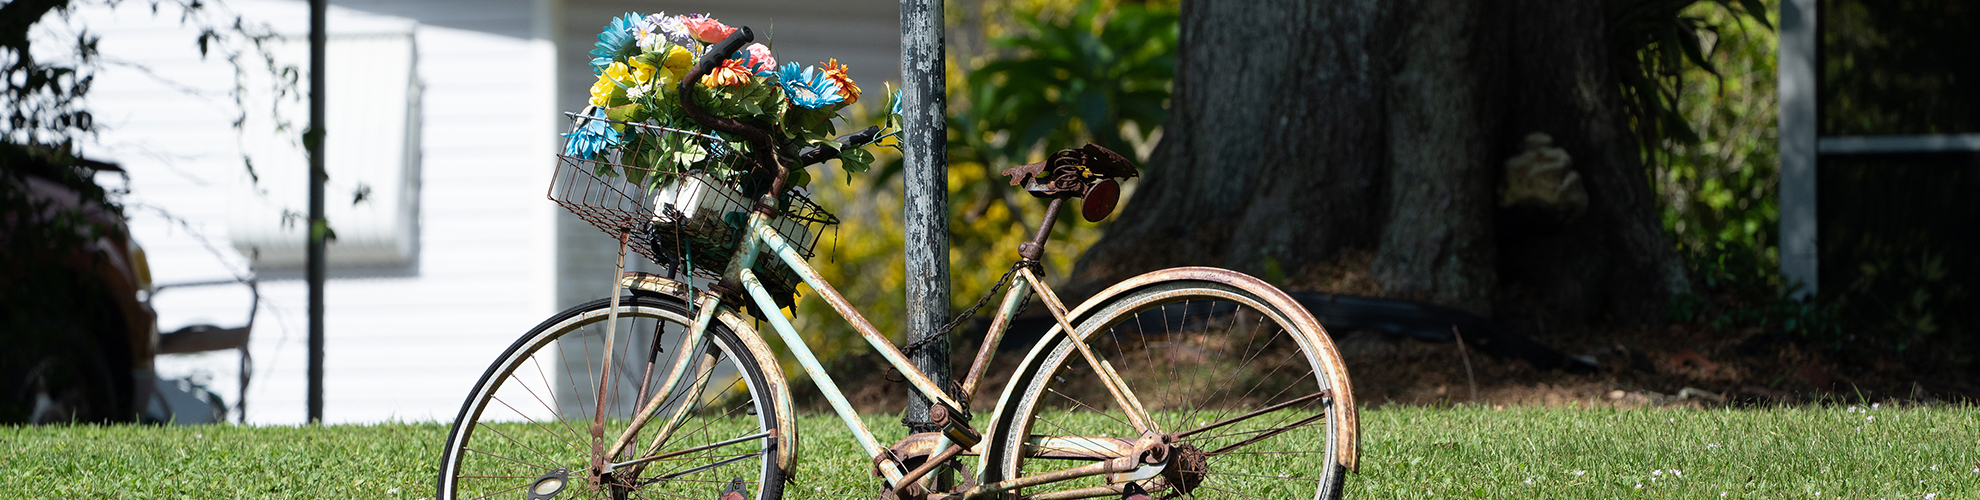 Photo of old bicylce with flowers in basket against a pole